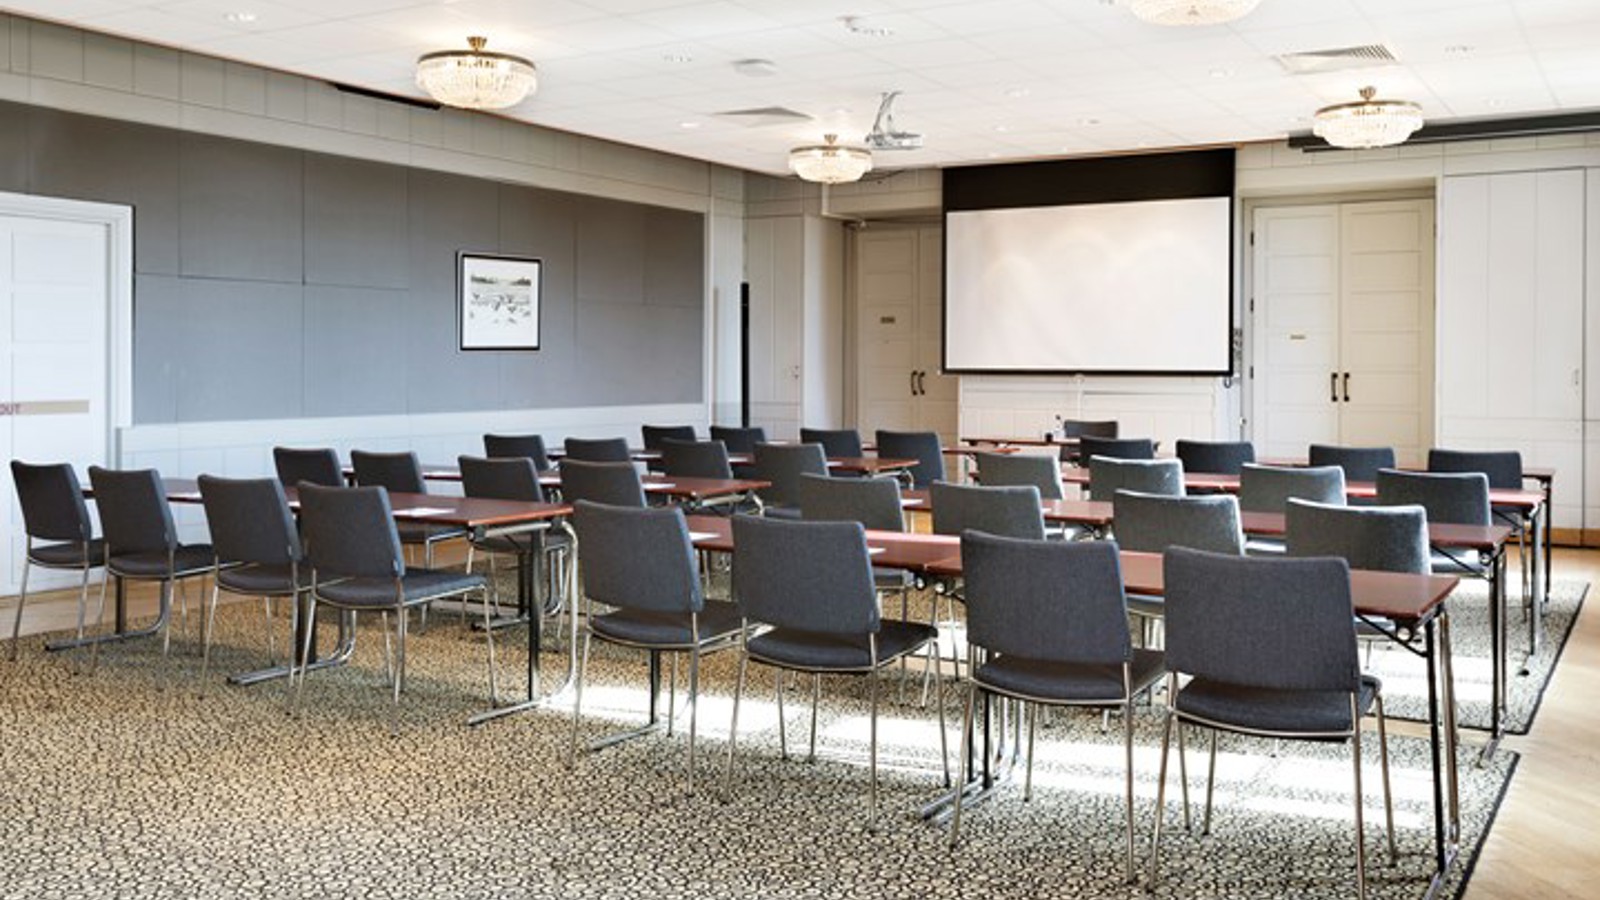 Conference room with cinema seating, a projector, gray carpet and gray chairs